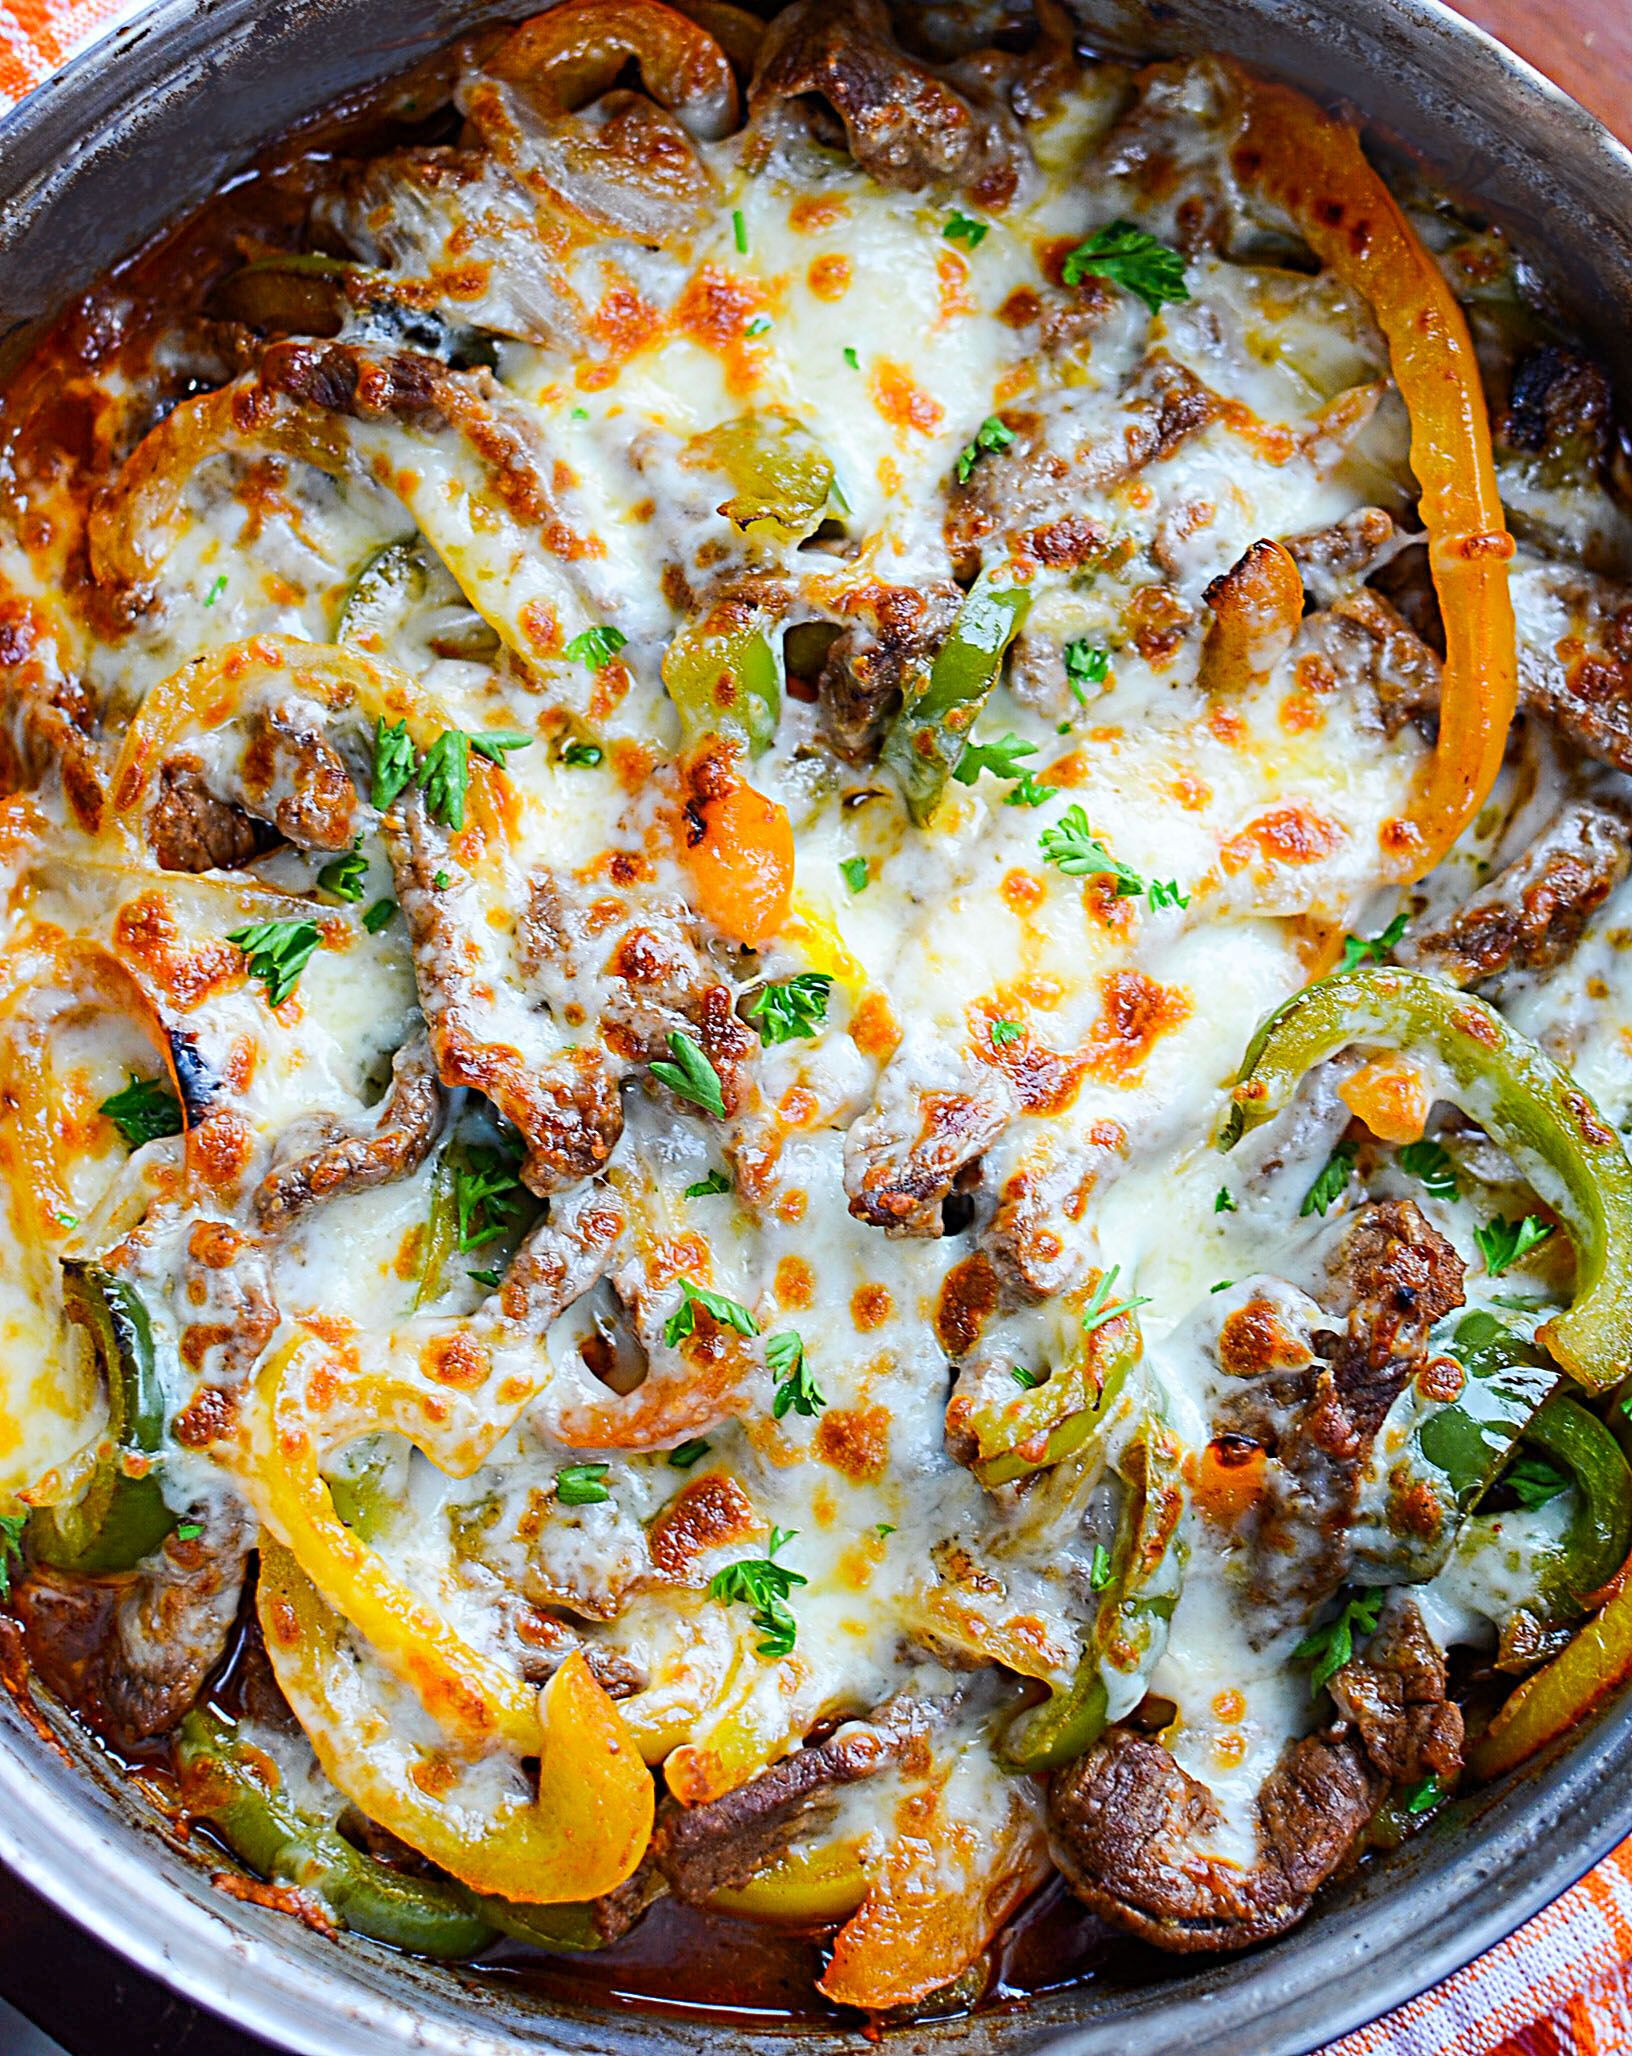 Low Carb Keto Cheesesteak Skillet
 Low Carb Philly Cheesesteak Skillet Recipe